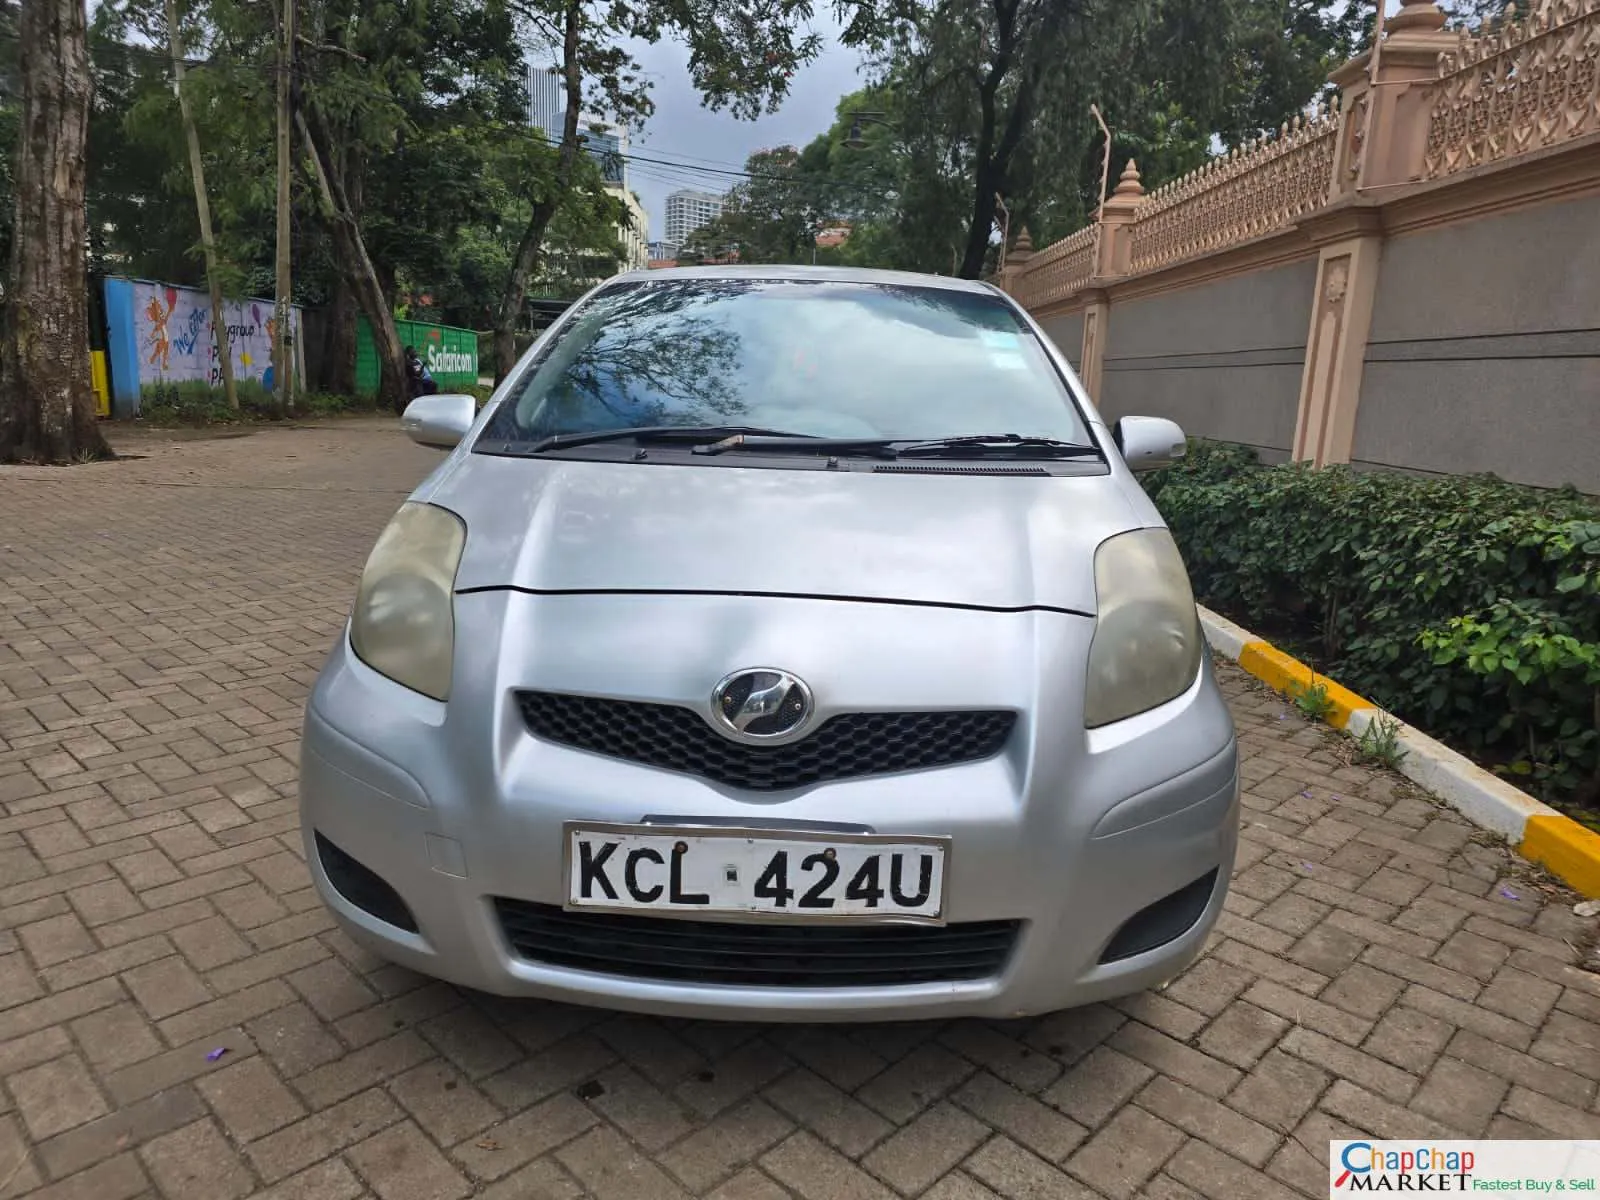 Toyota Vitz NEW SHAPE 1300cc You PAY 30% Deposit INSTALLMENTS Trade in Ok New hire purchase installments